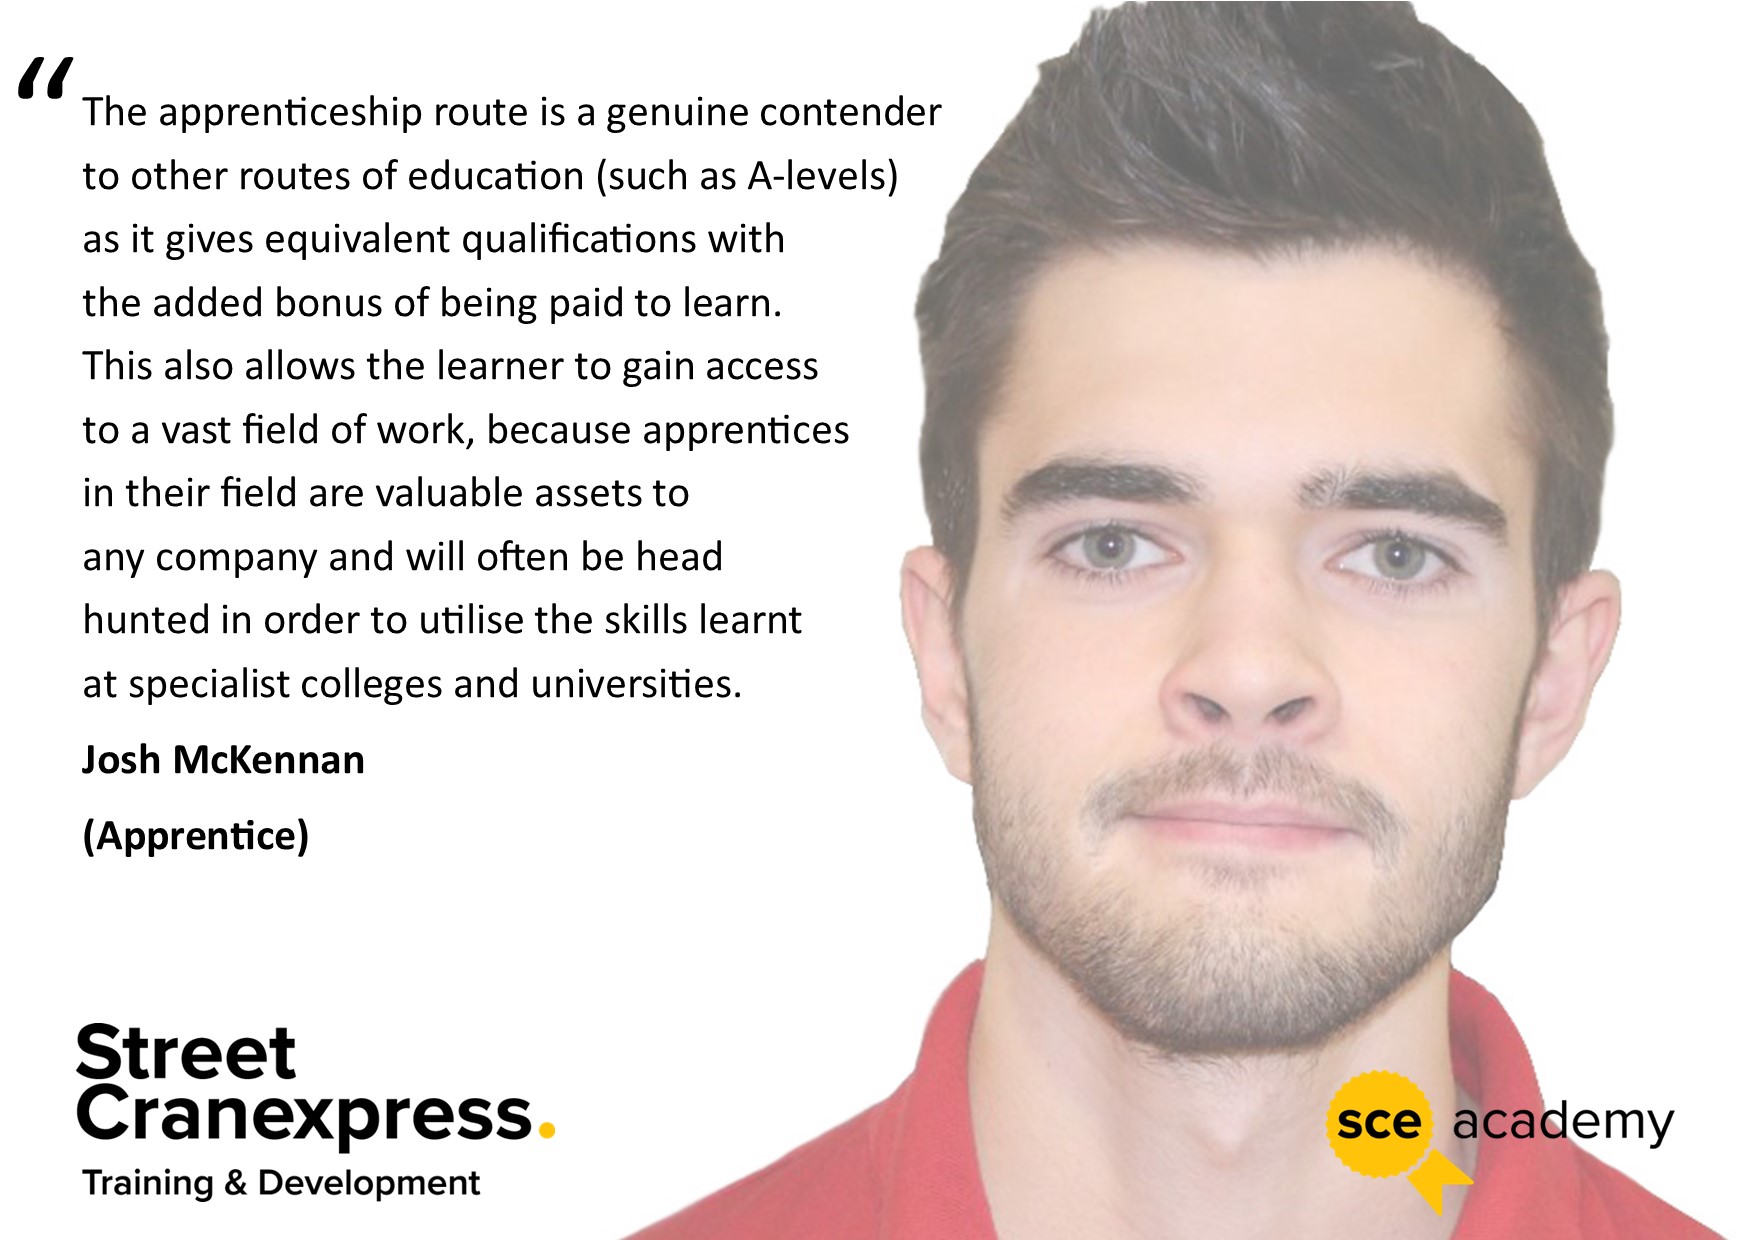 A picture of Josh McKennan, a Street Cranexpress apprentice, with a quote talking about his training that says, "The apprenticeship route is a genuine contender to other routes of education (such as A-levels) as it gives equivalent qualifications with the added bonus of being paid to learn. This also allows the learner to gain access to a vast field of work, because apprentices in their field are valuable assets to any company and will often be headhunted in order to utilise the skills learned at specialist colleges and universities."